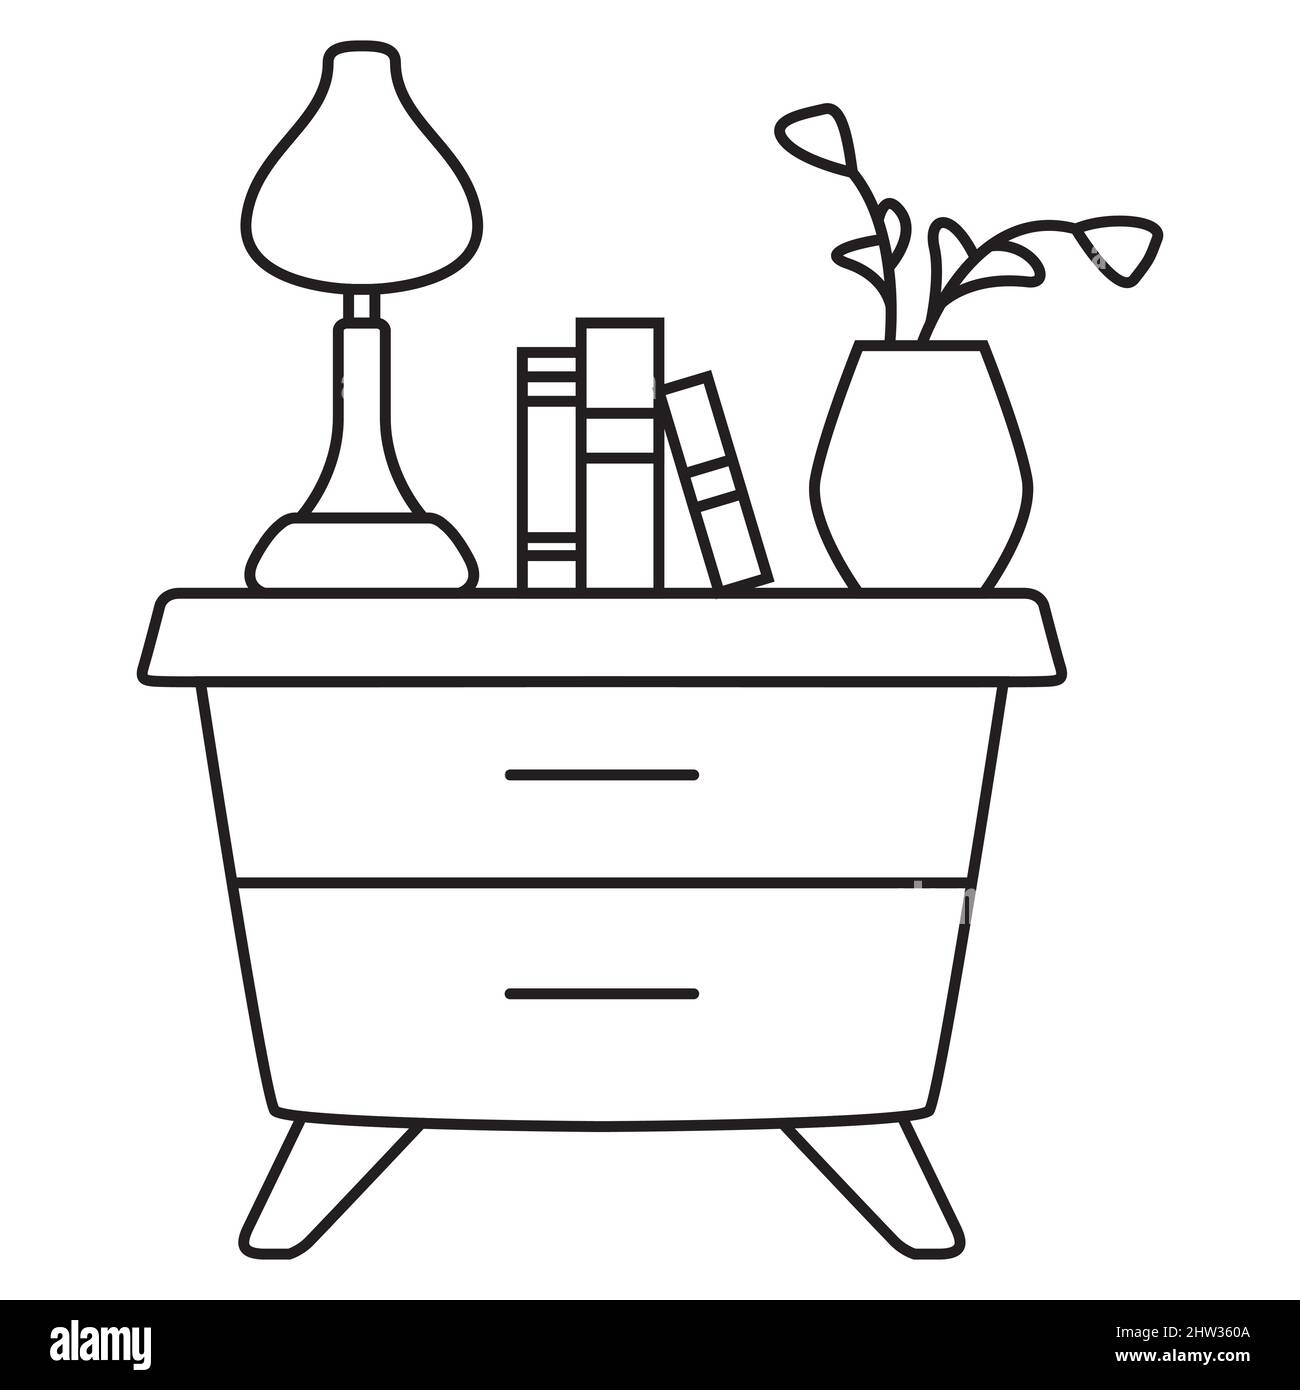 Nightstand outline icon.Thin line black bedside table with lamp. Stock Vector